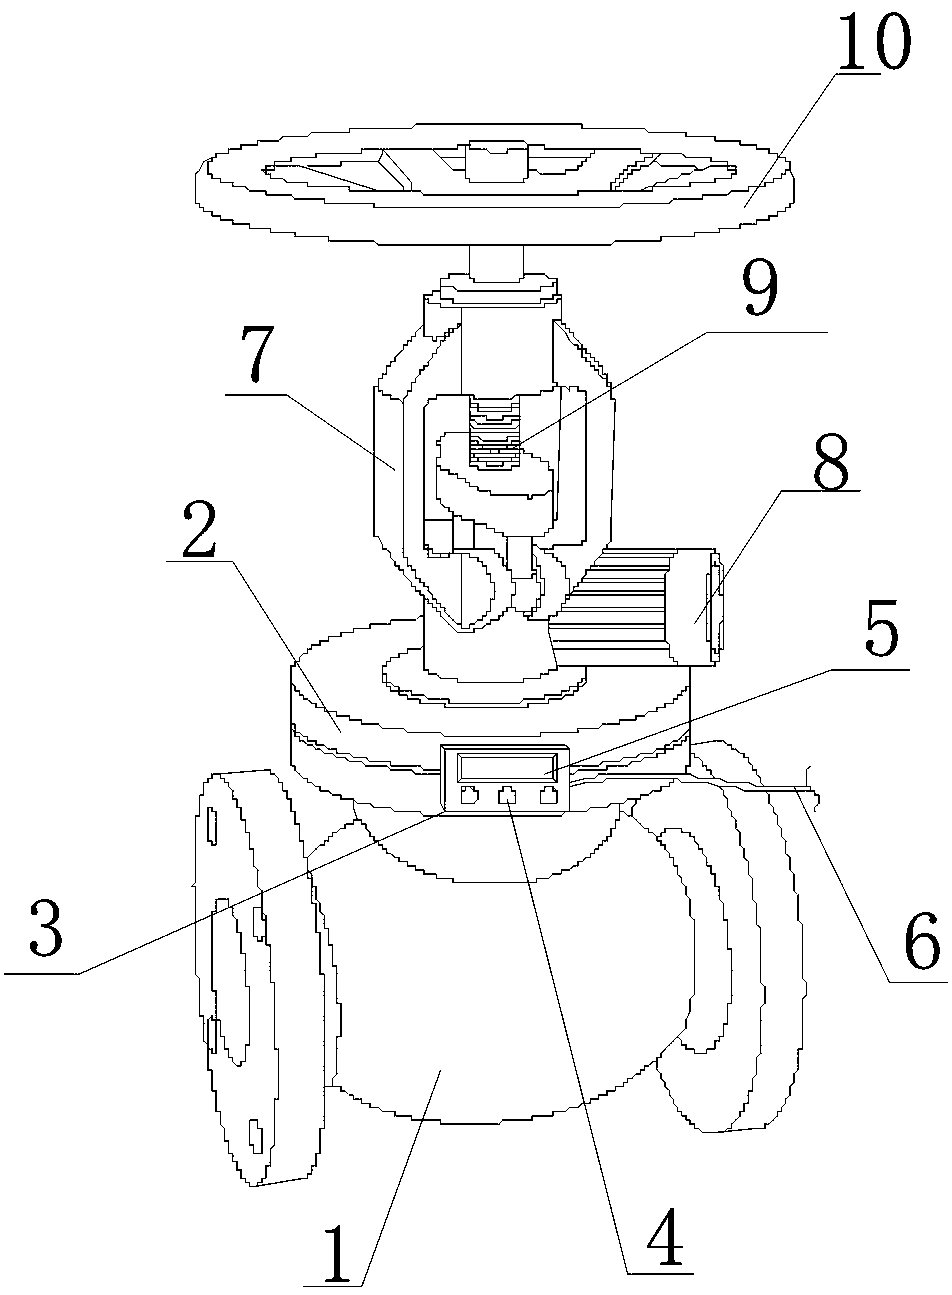 A high-pressure direct-flow stop valve